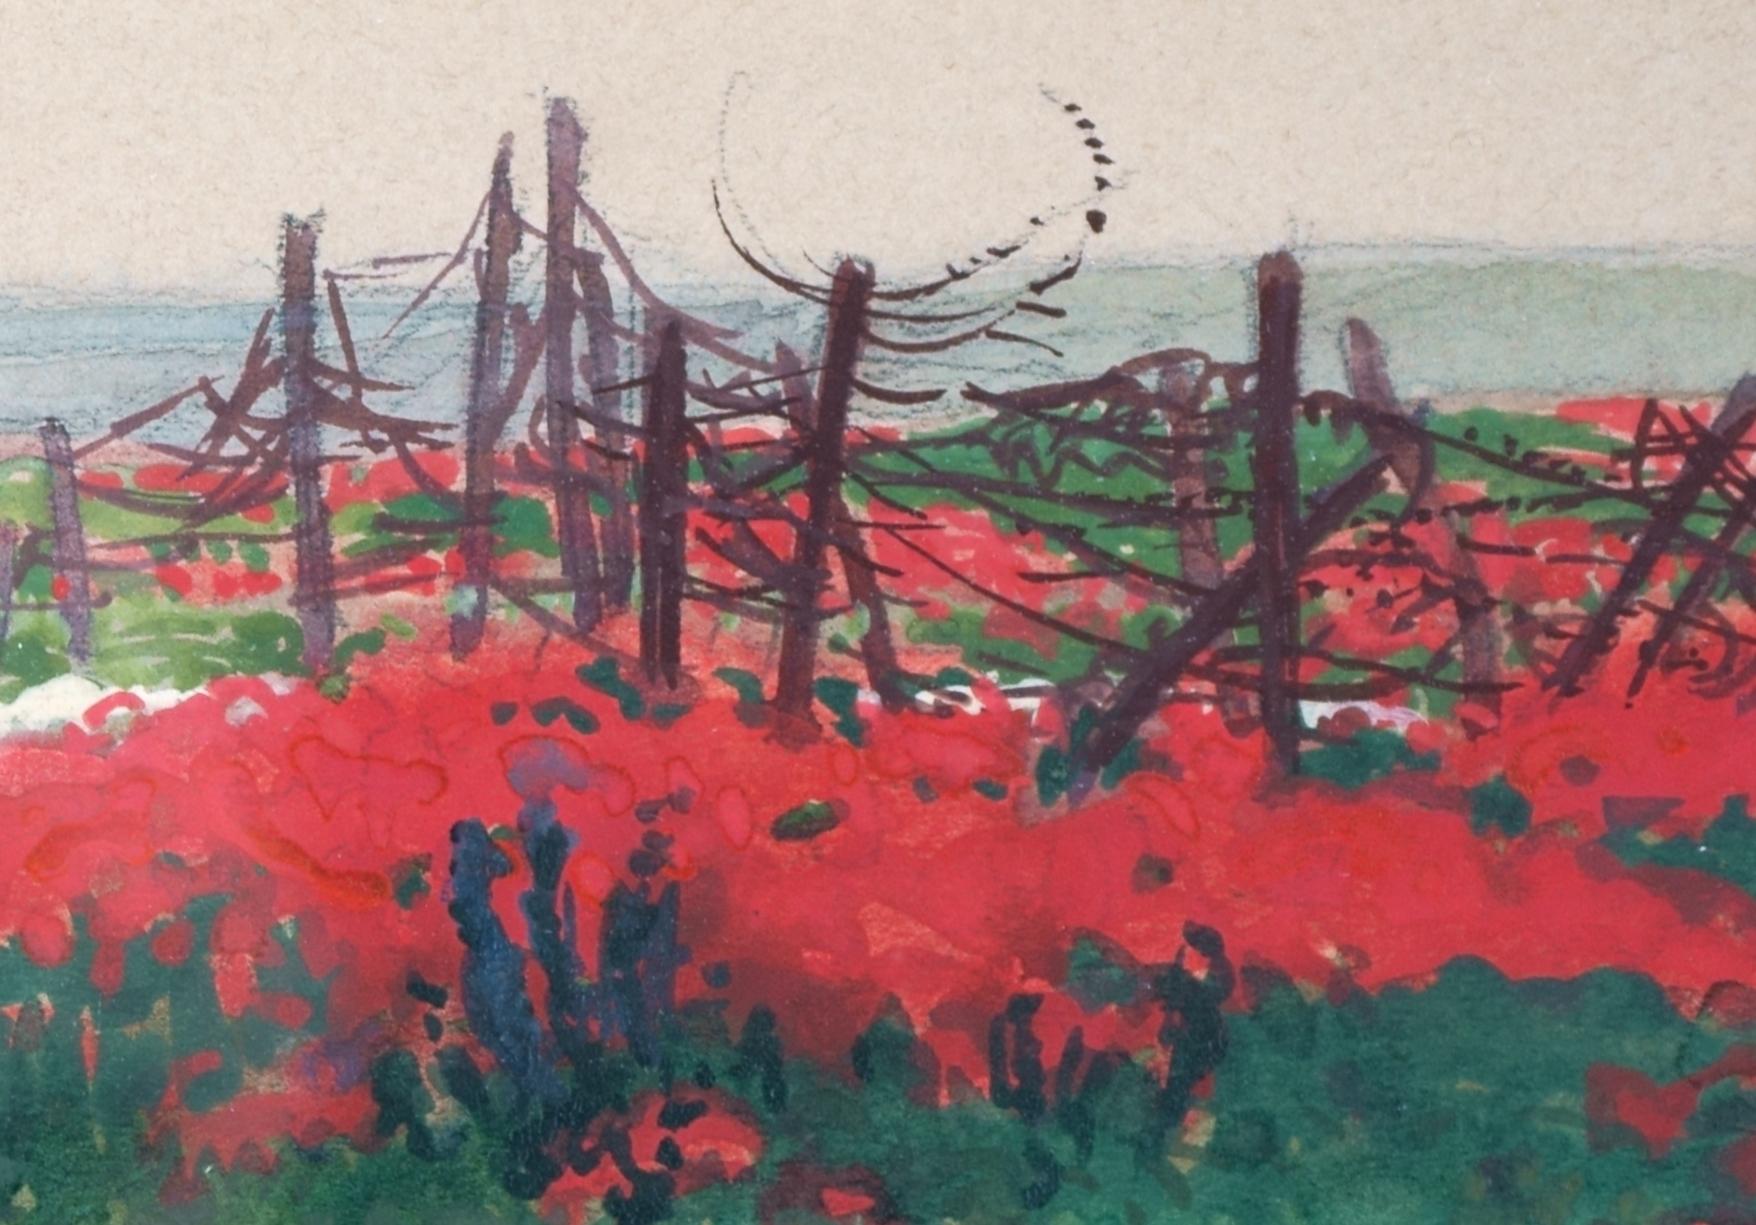 Johannes Friedrich Heinrich Hänsch (1875-1945), Red blooming war landscape with dead soldier, 1918. Watercolor and gouache on paper, 15 x 24.5 cm (image), 27 x 37 cm (sheet size / frame), monogrammed and dated 